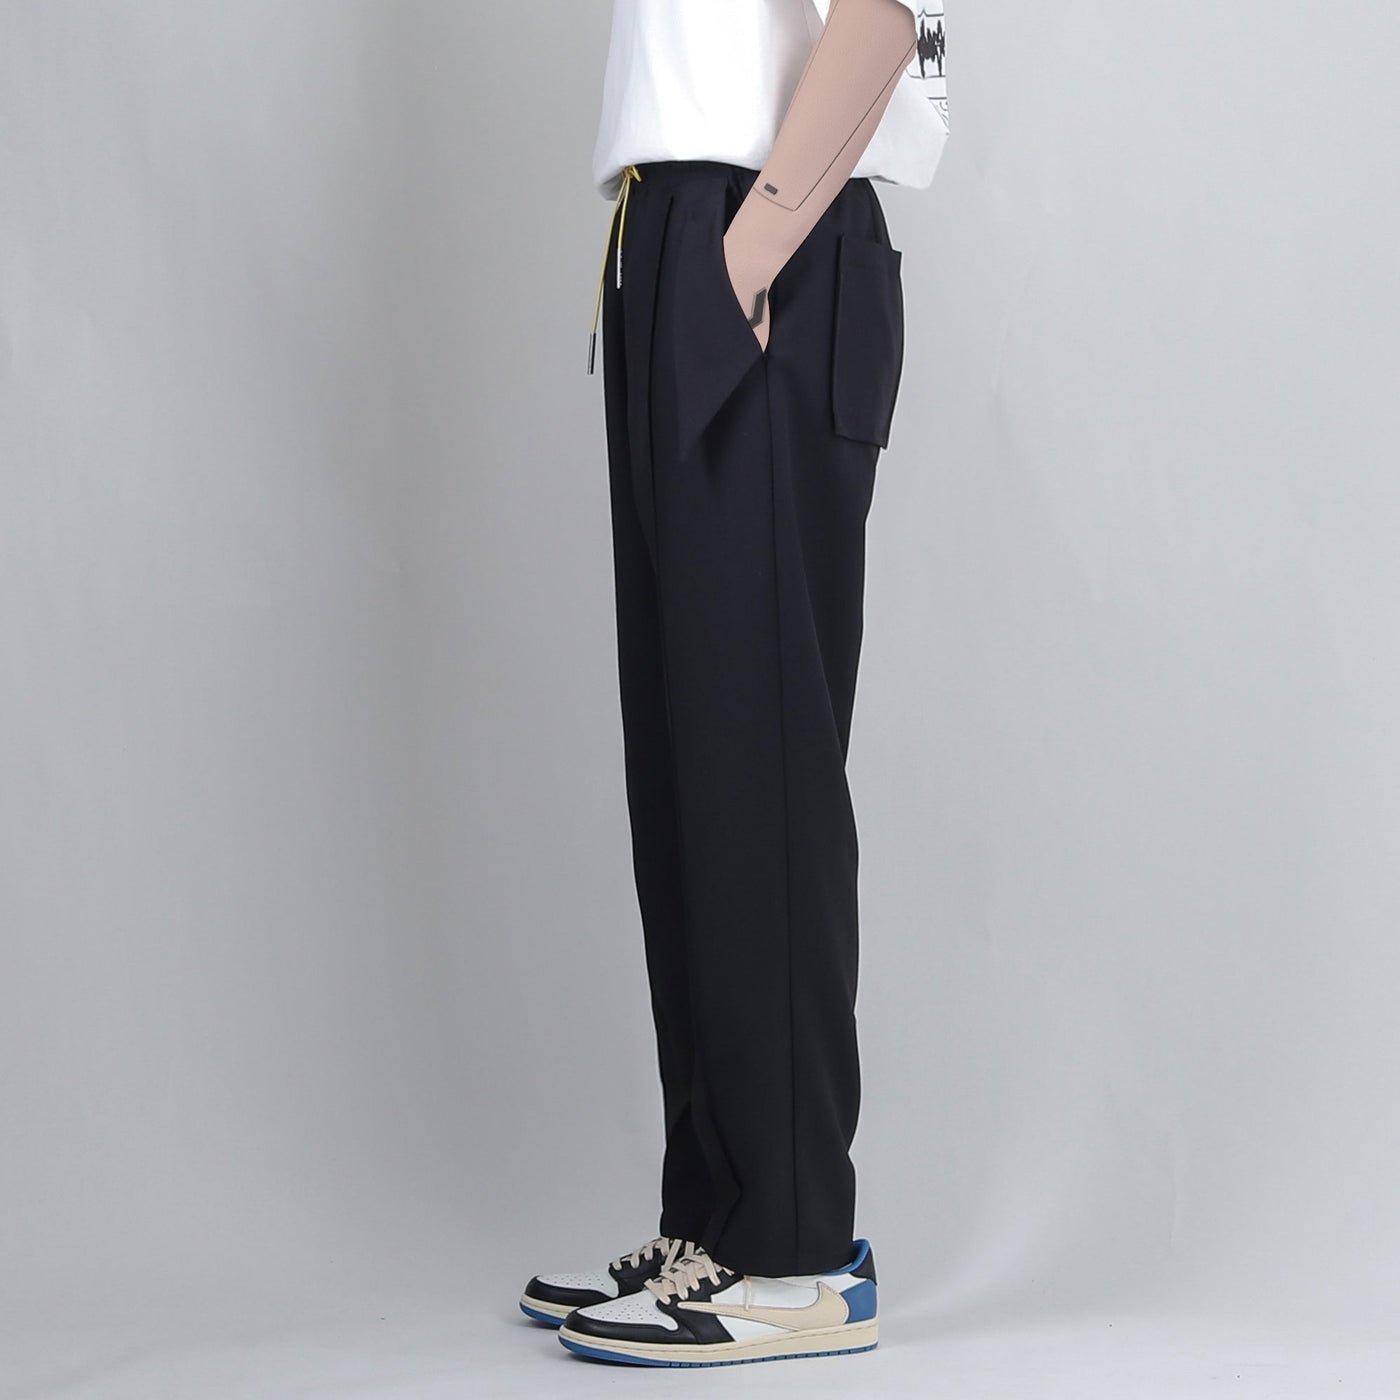 Relaxed Fit Pants Korean Street Fashion Pants By Perdu Shop Online at OH Vault